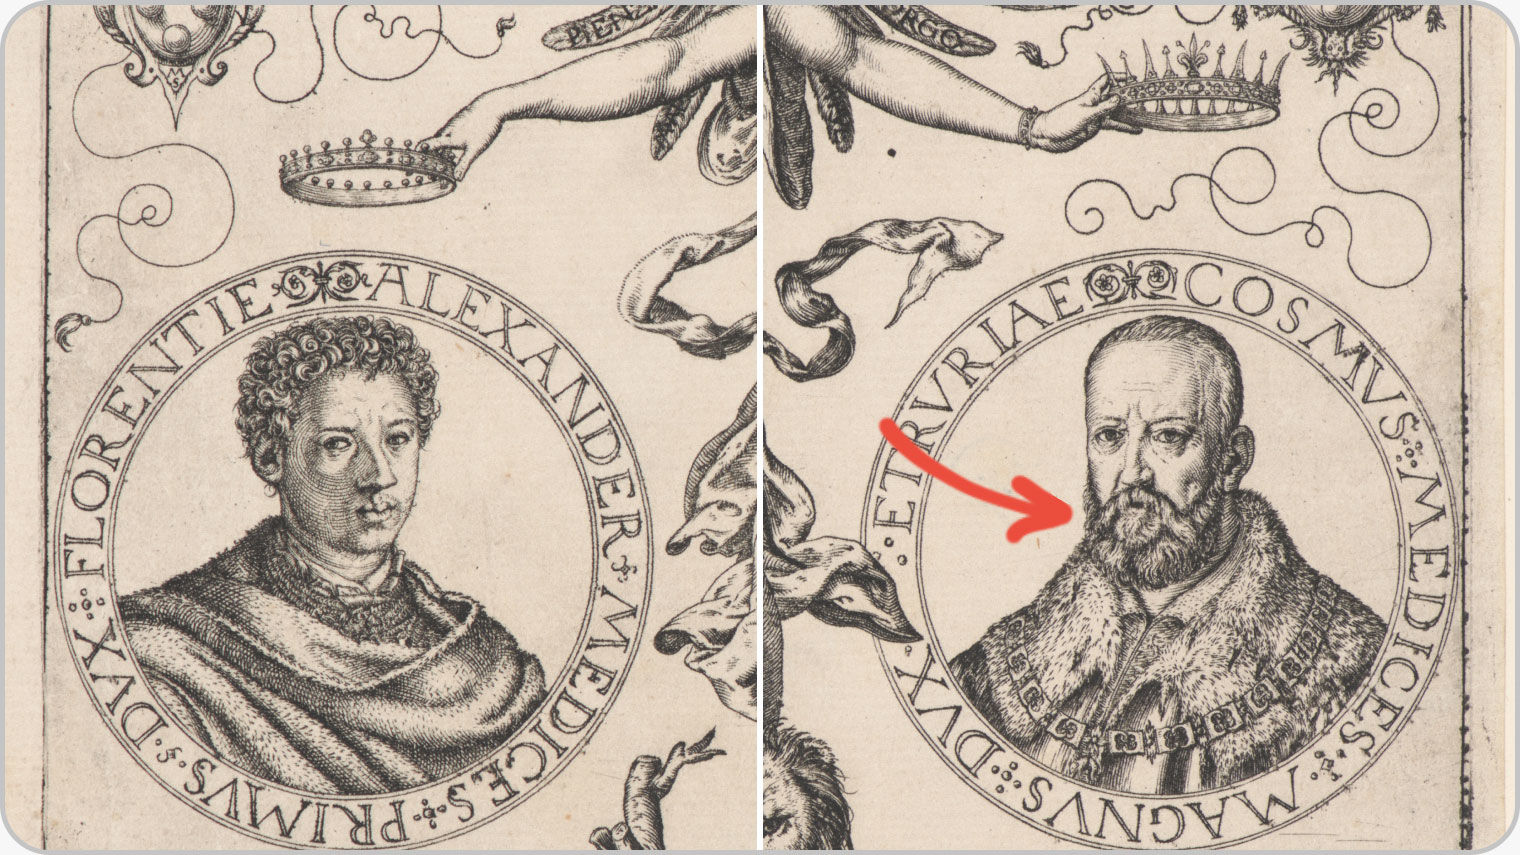 Detail of an engraving; red mark-ups that are not original to the artwork have been added digitally to call out the difference in age between the portraits on the left and right by pointing to the right-hand subject’s beard